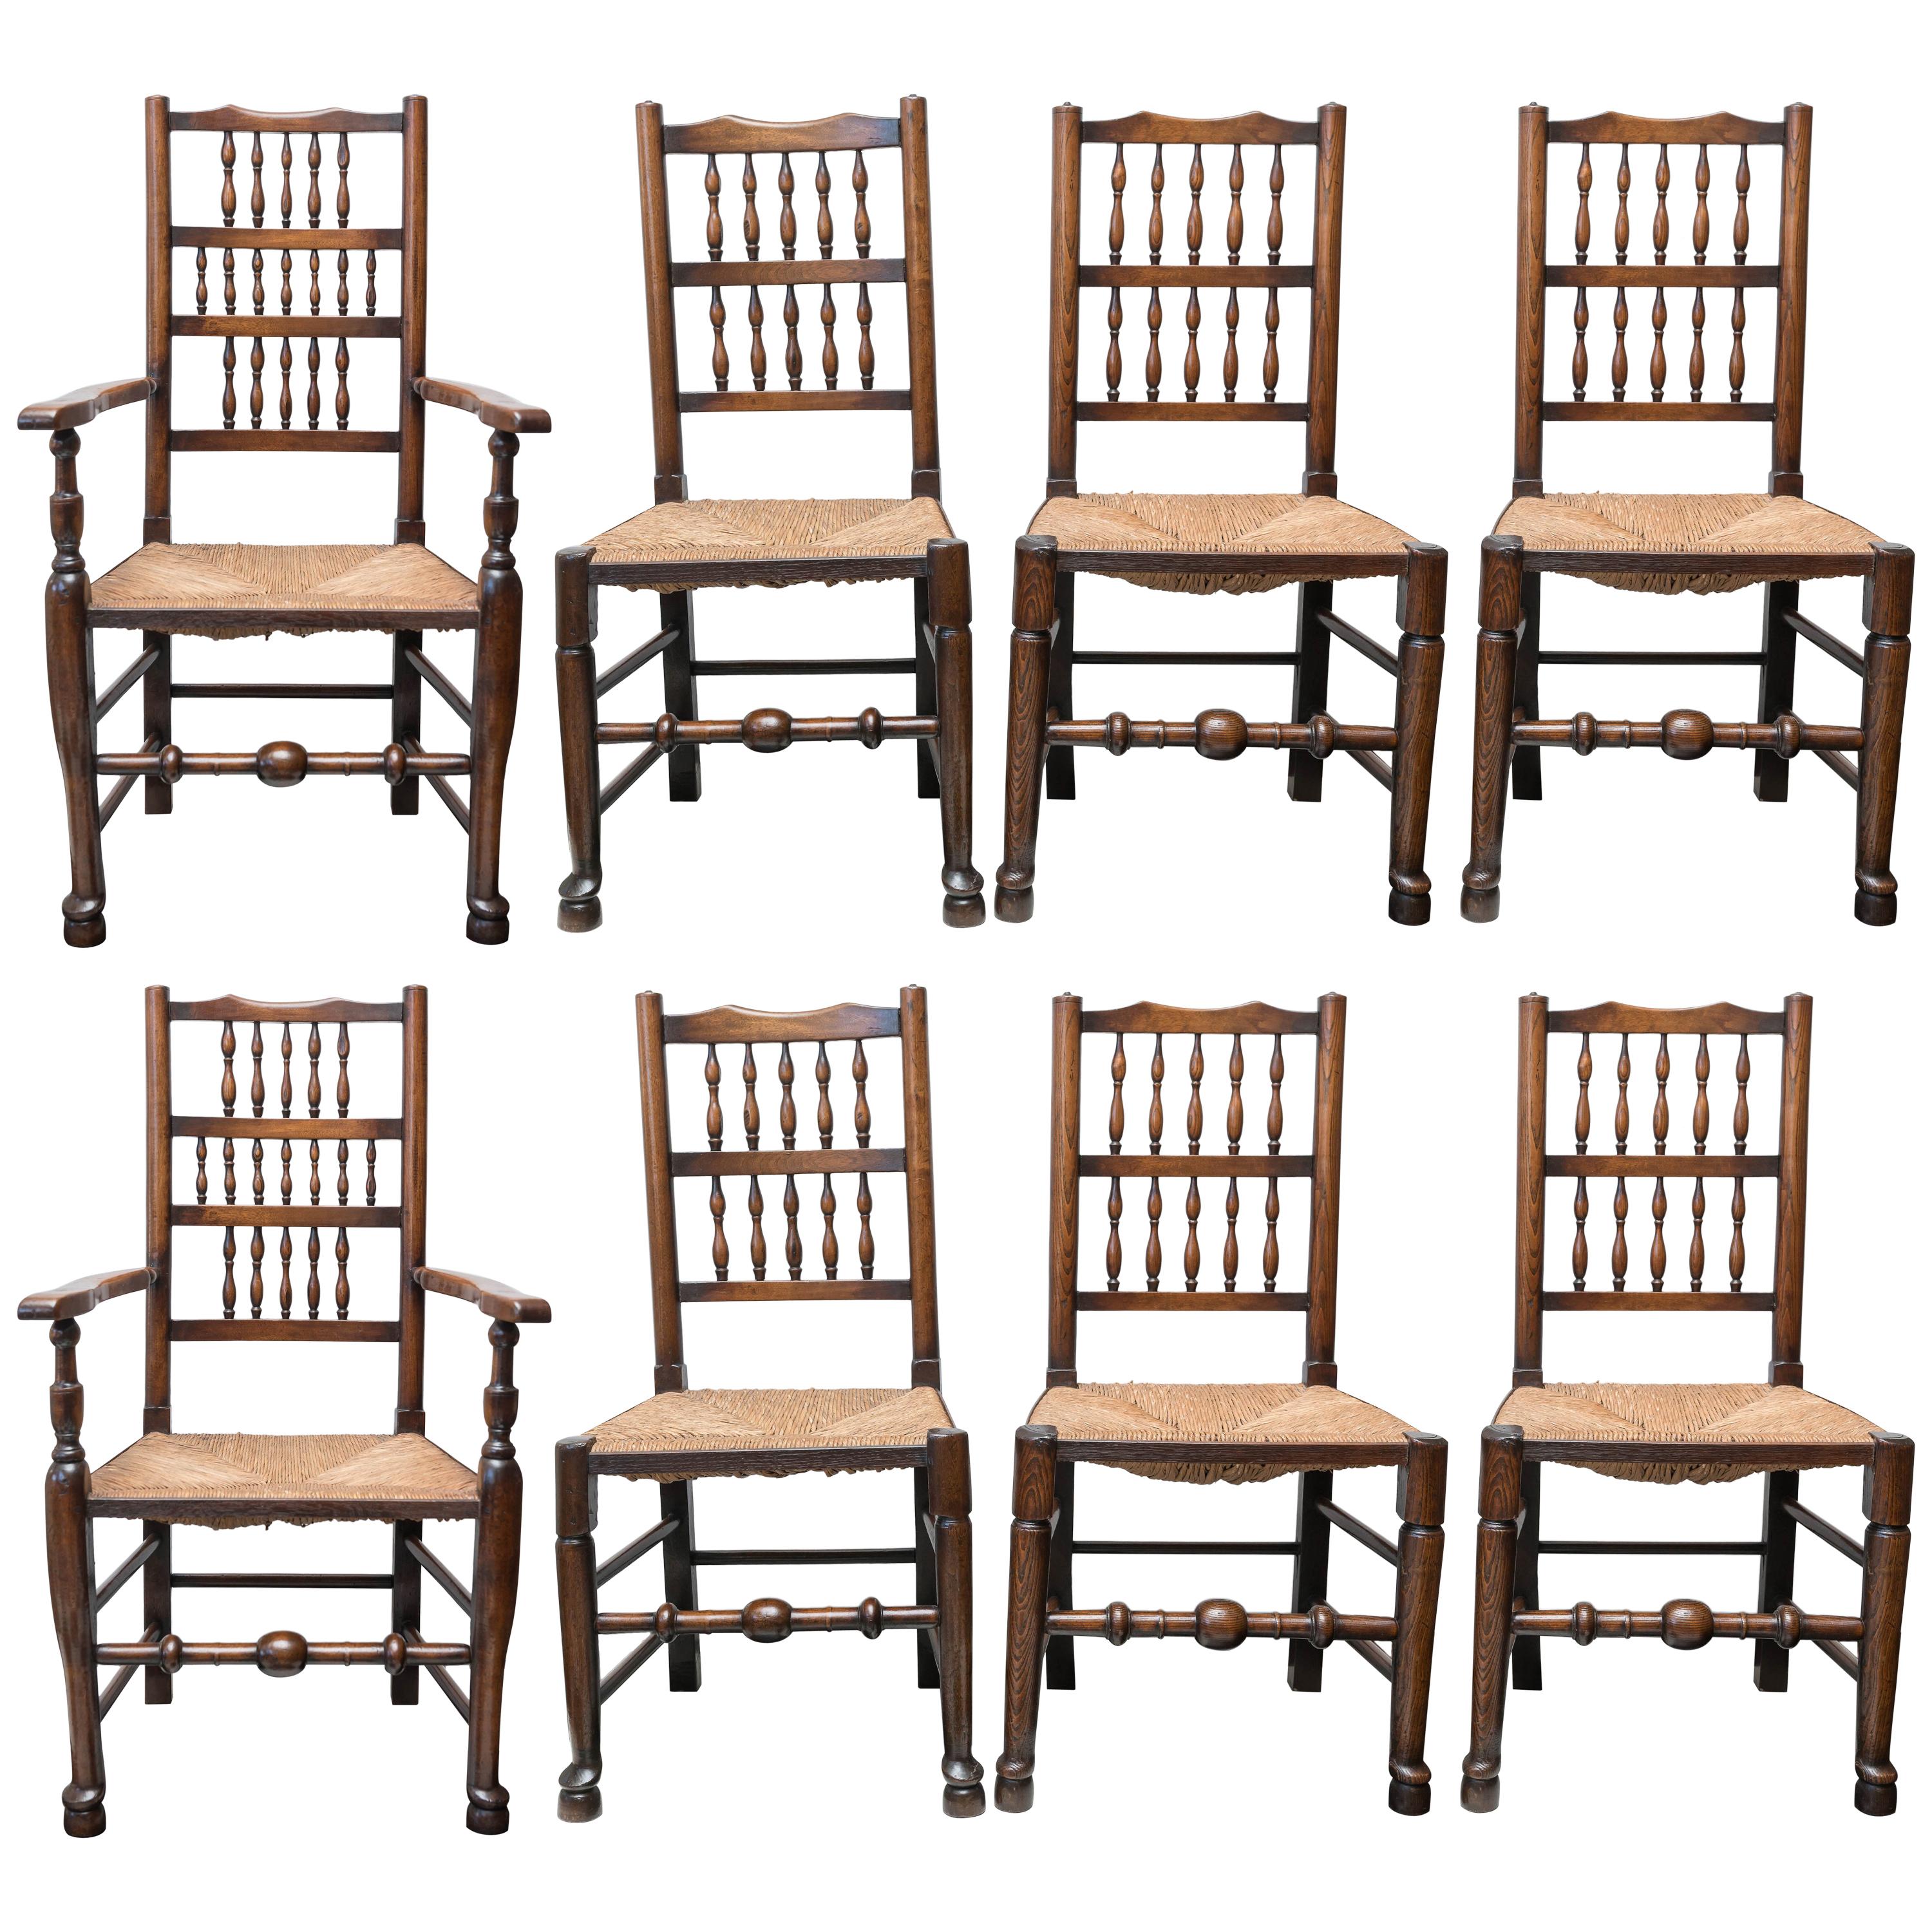 Set of Eight Late 18th-Early 19th Century English Ladder Back, Rush Seat, Chairs